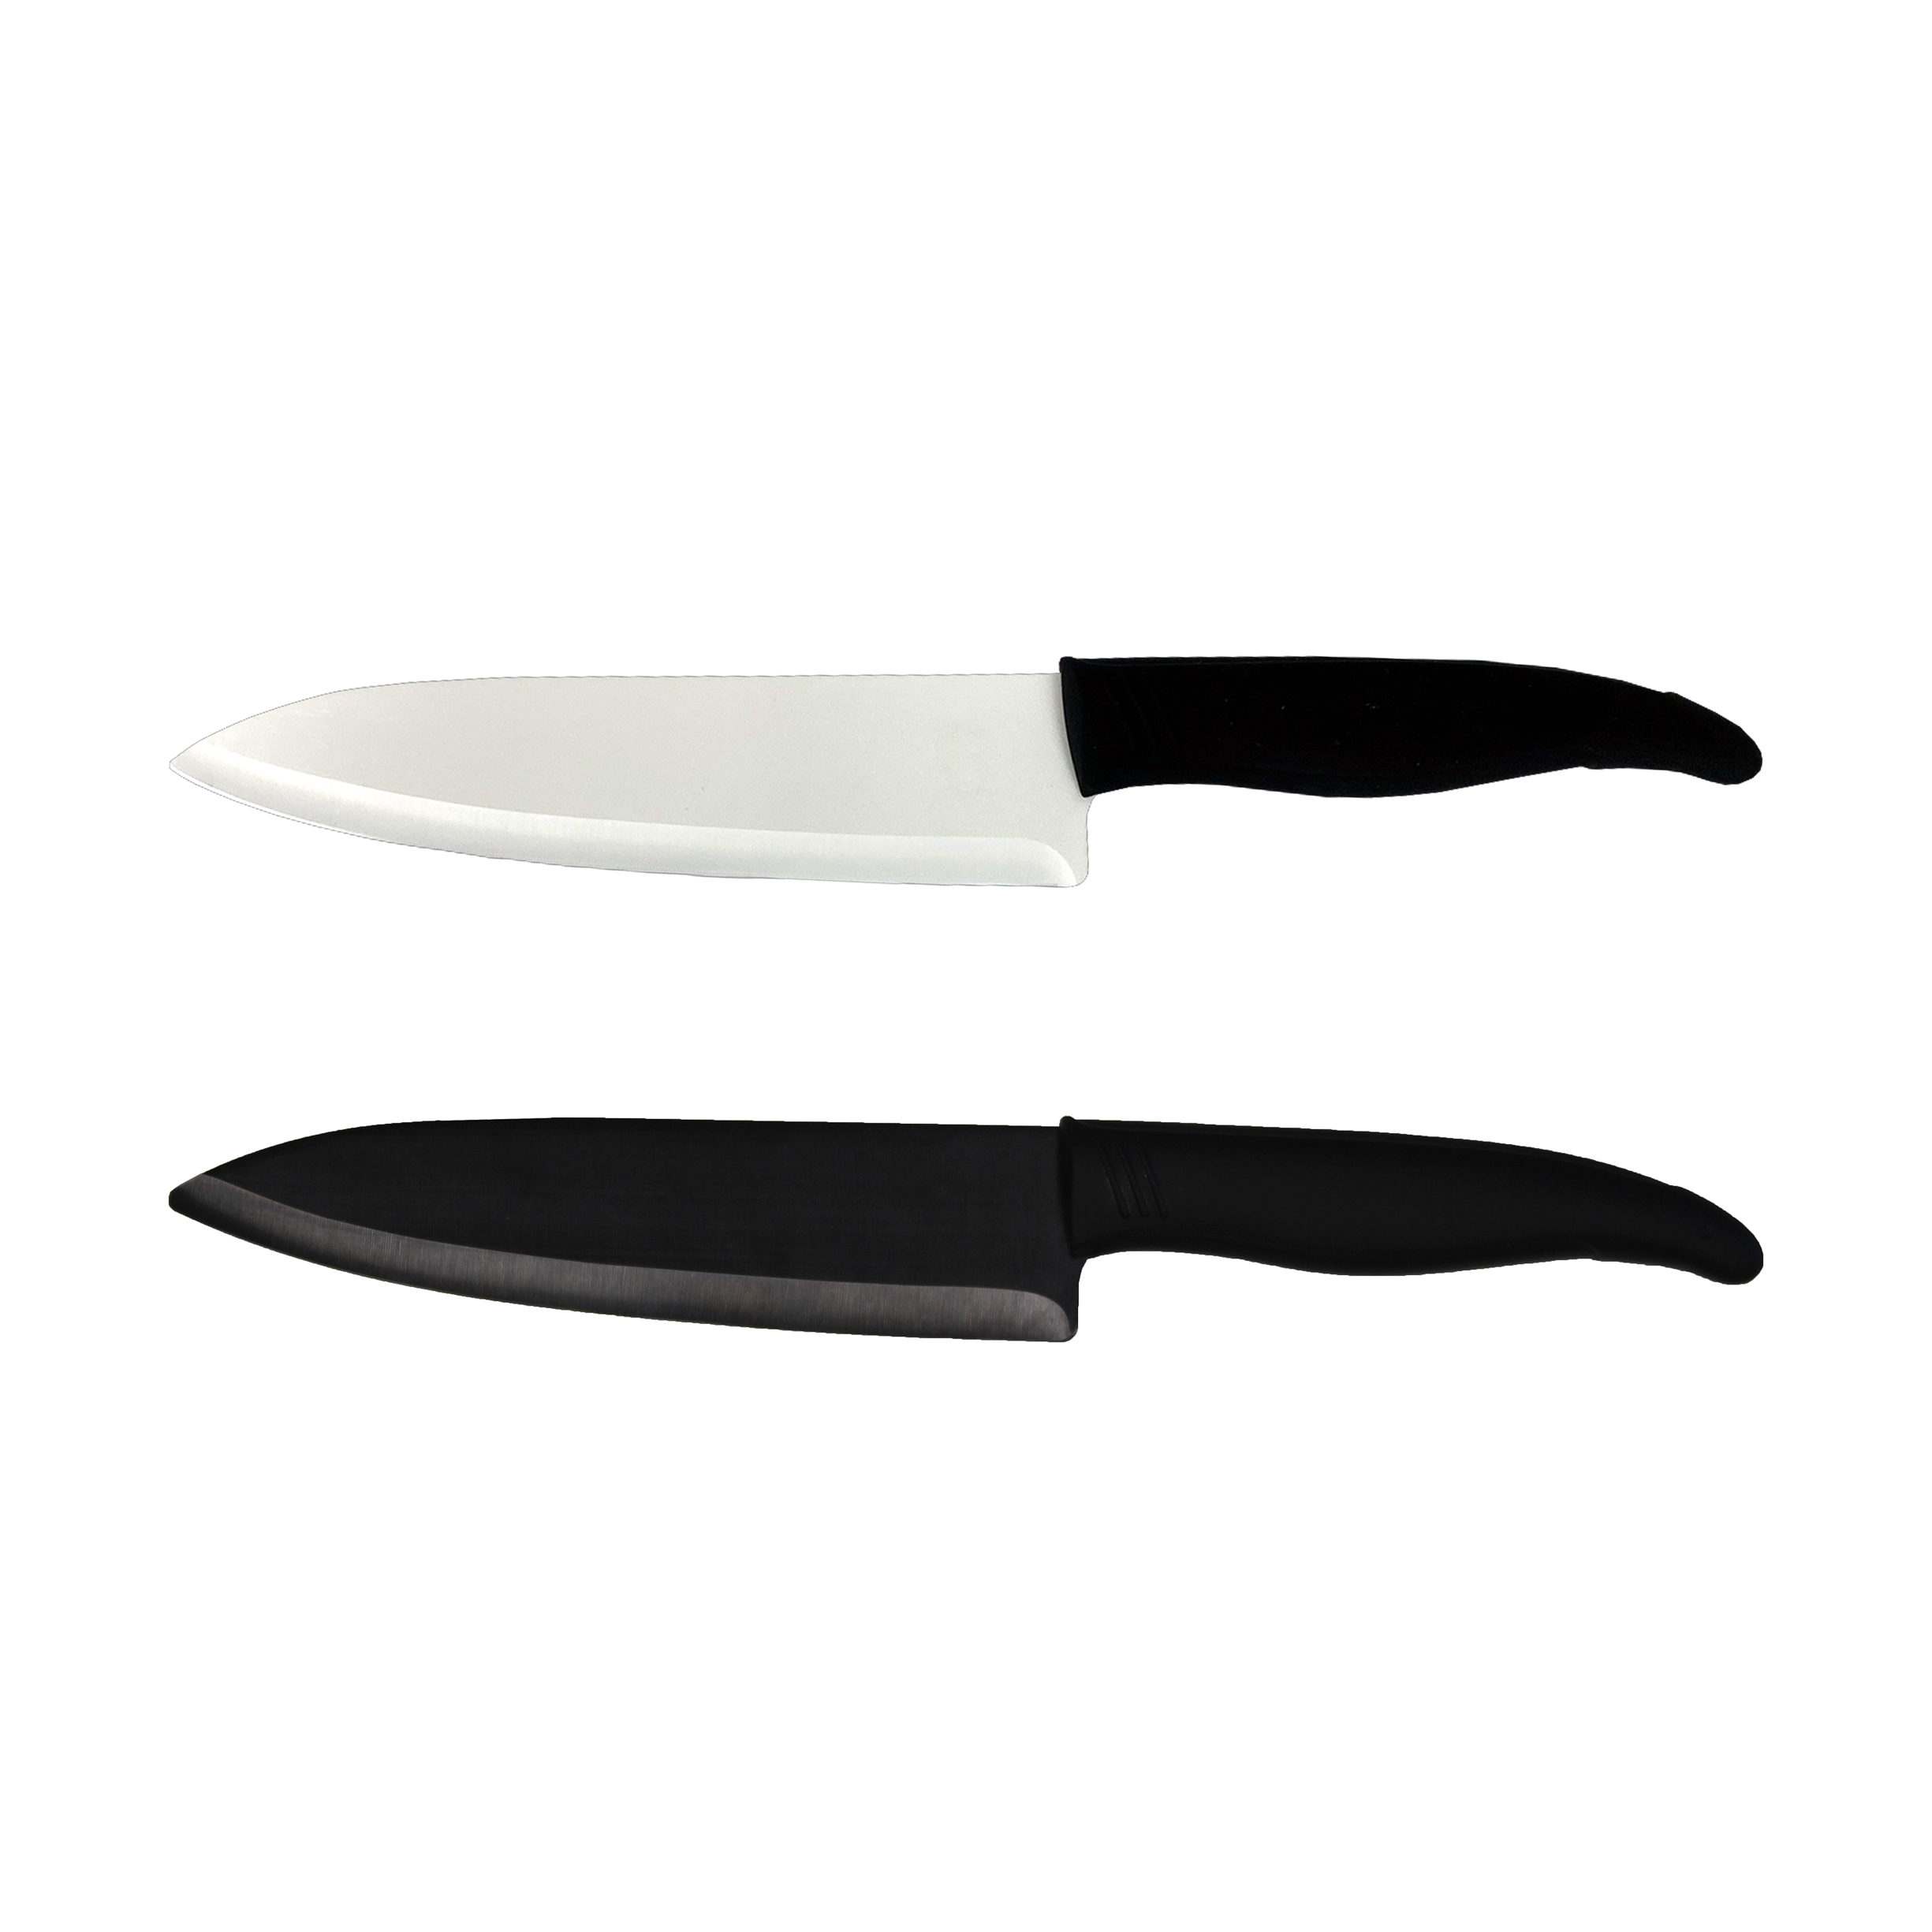 7″ Ceramic Chef Knife - Town Food Service Equipment Co., Inc.